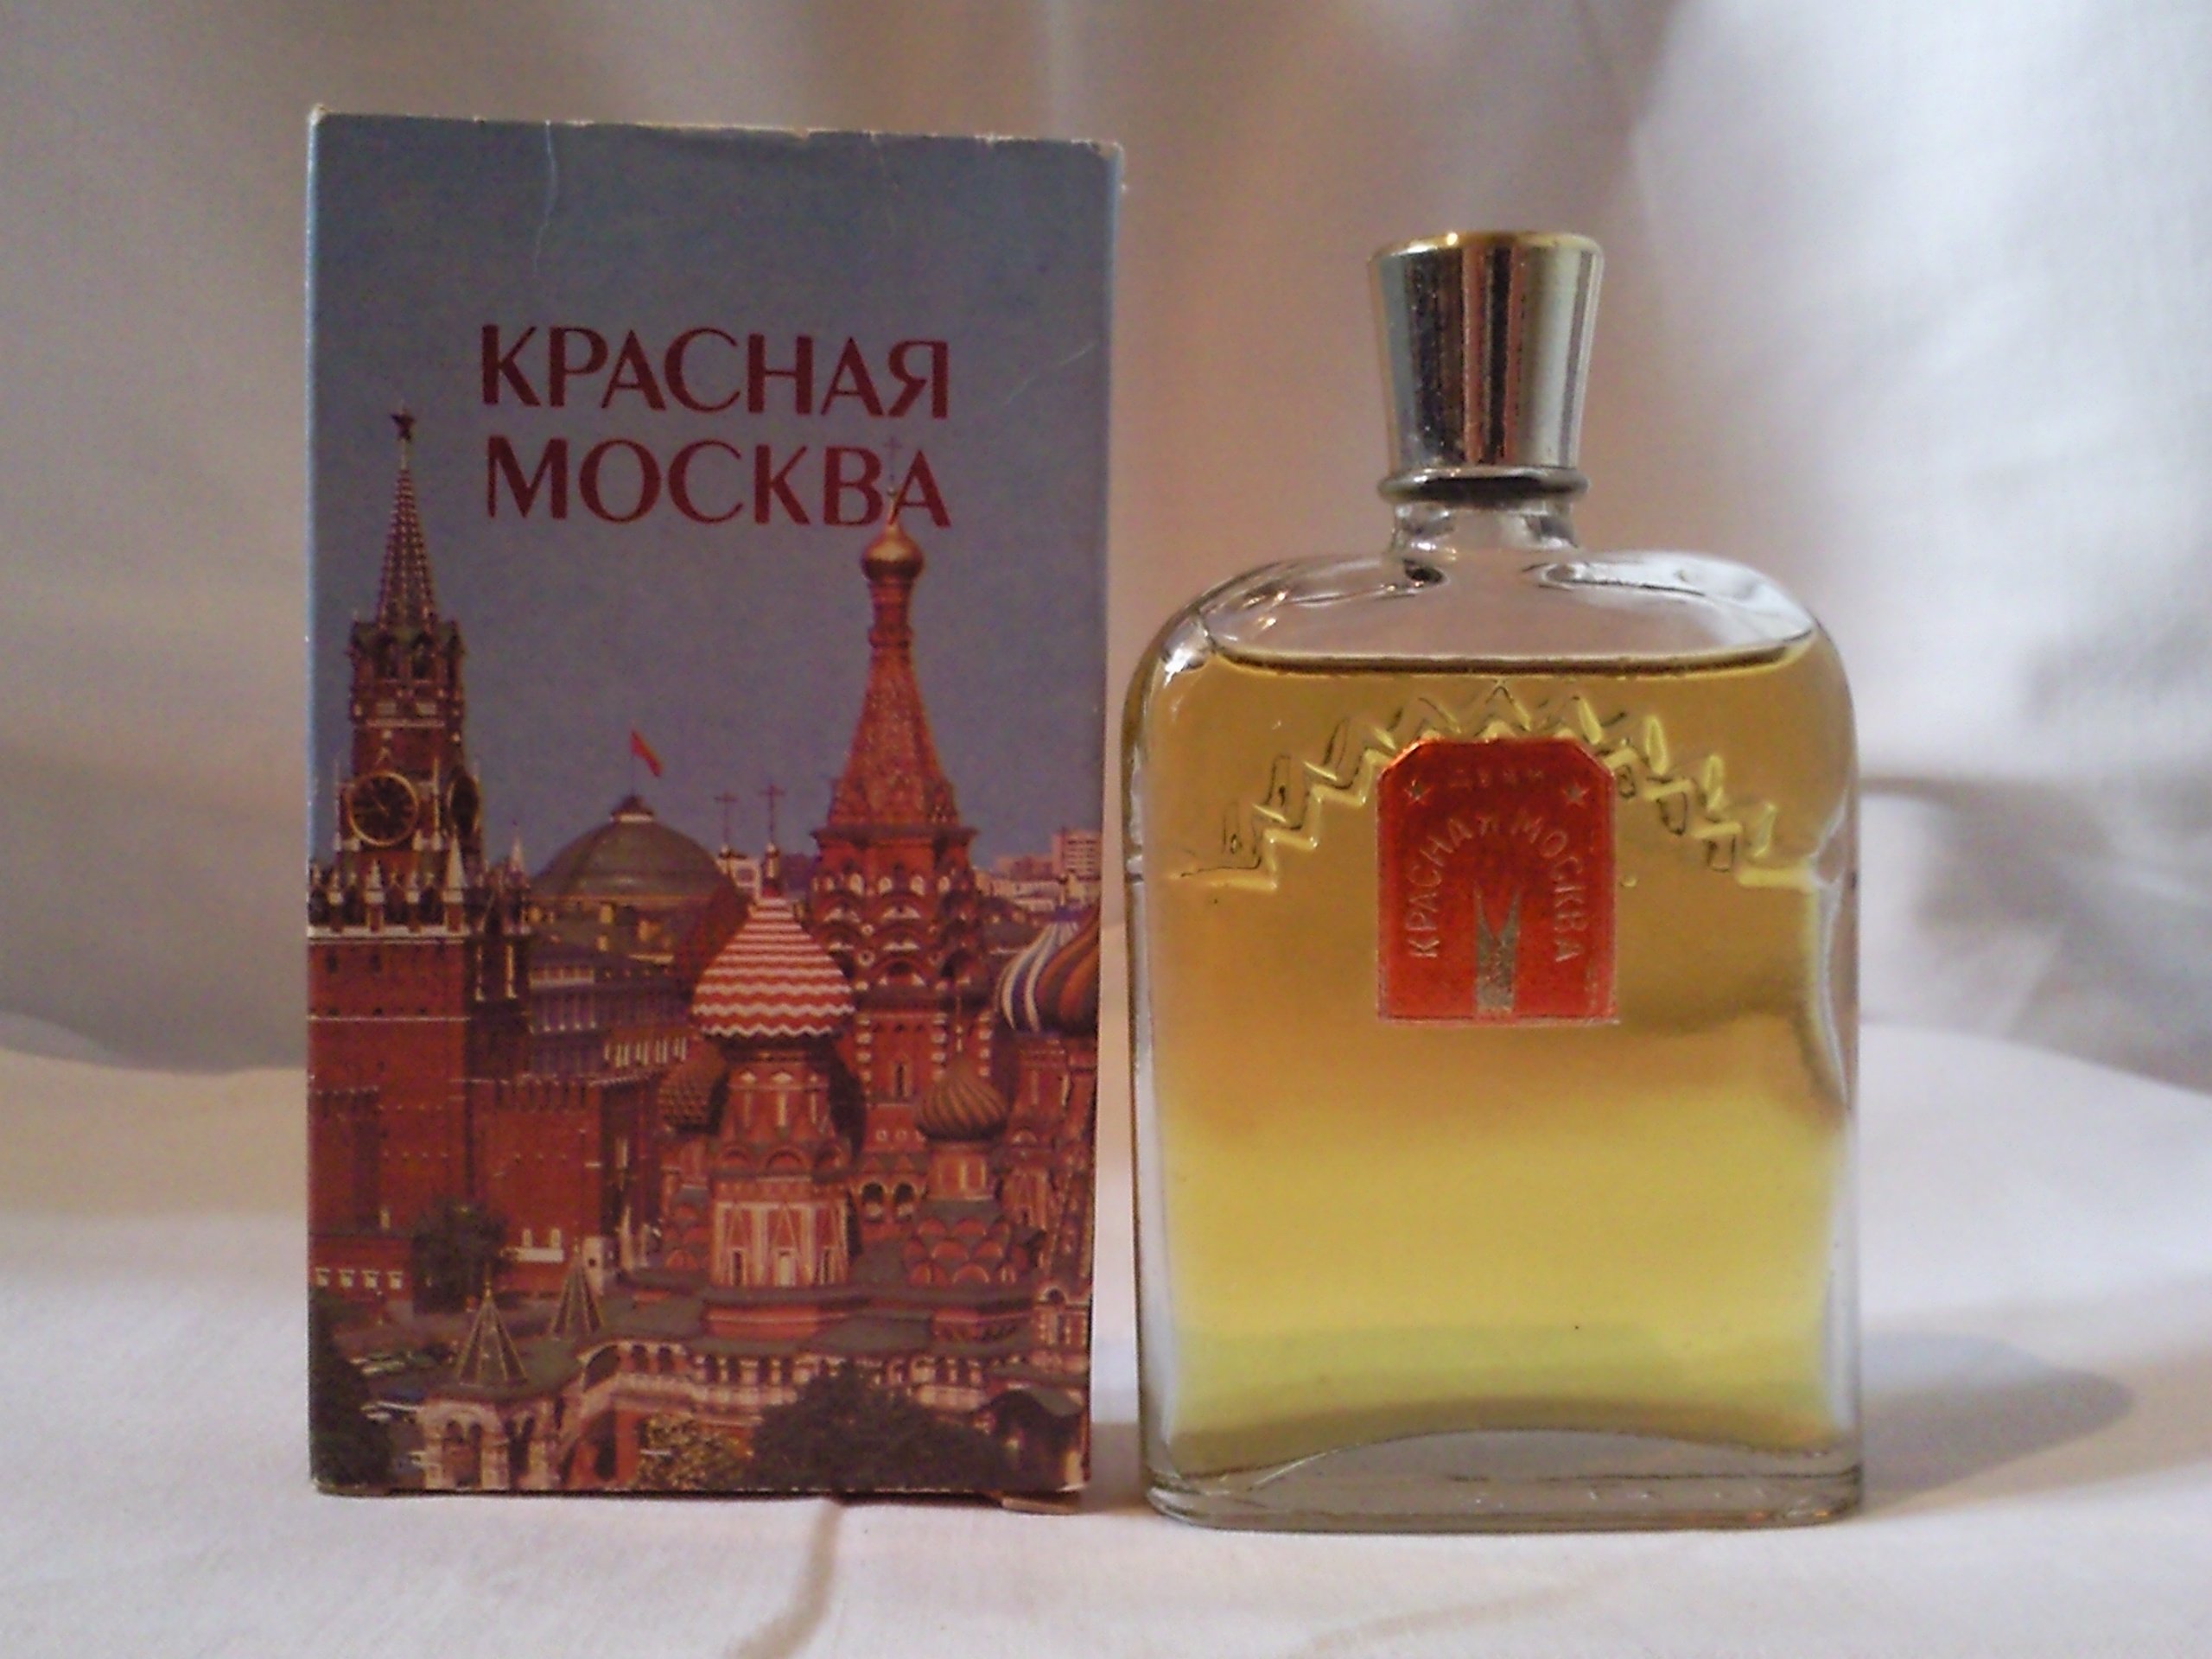 Going rouge: a brief history of Soviet cosmetics